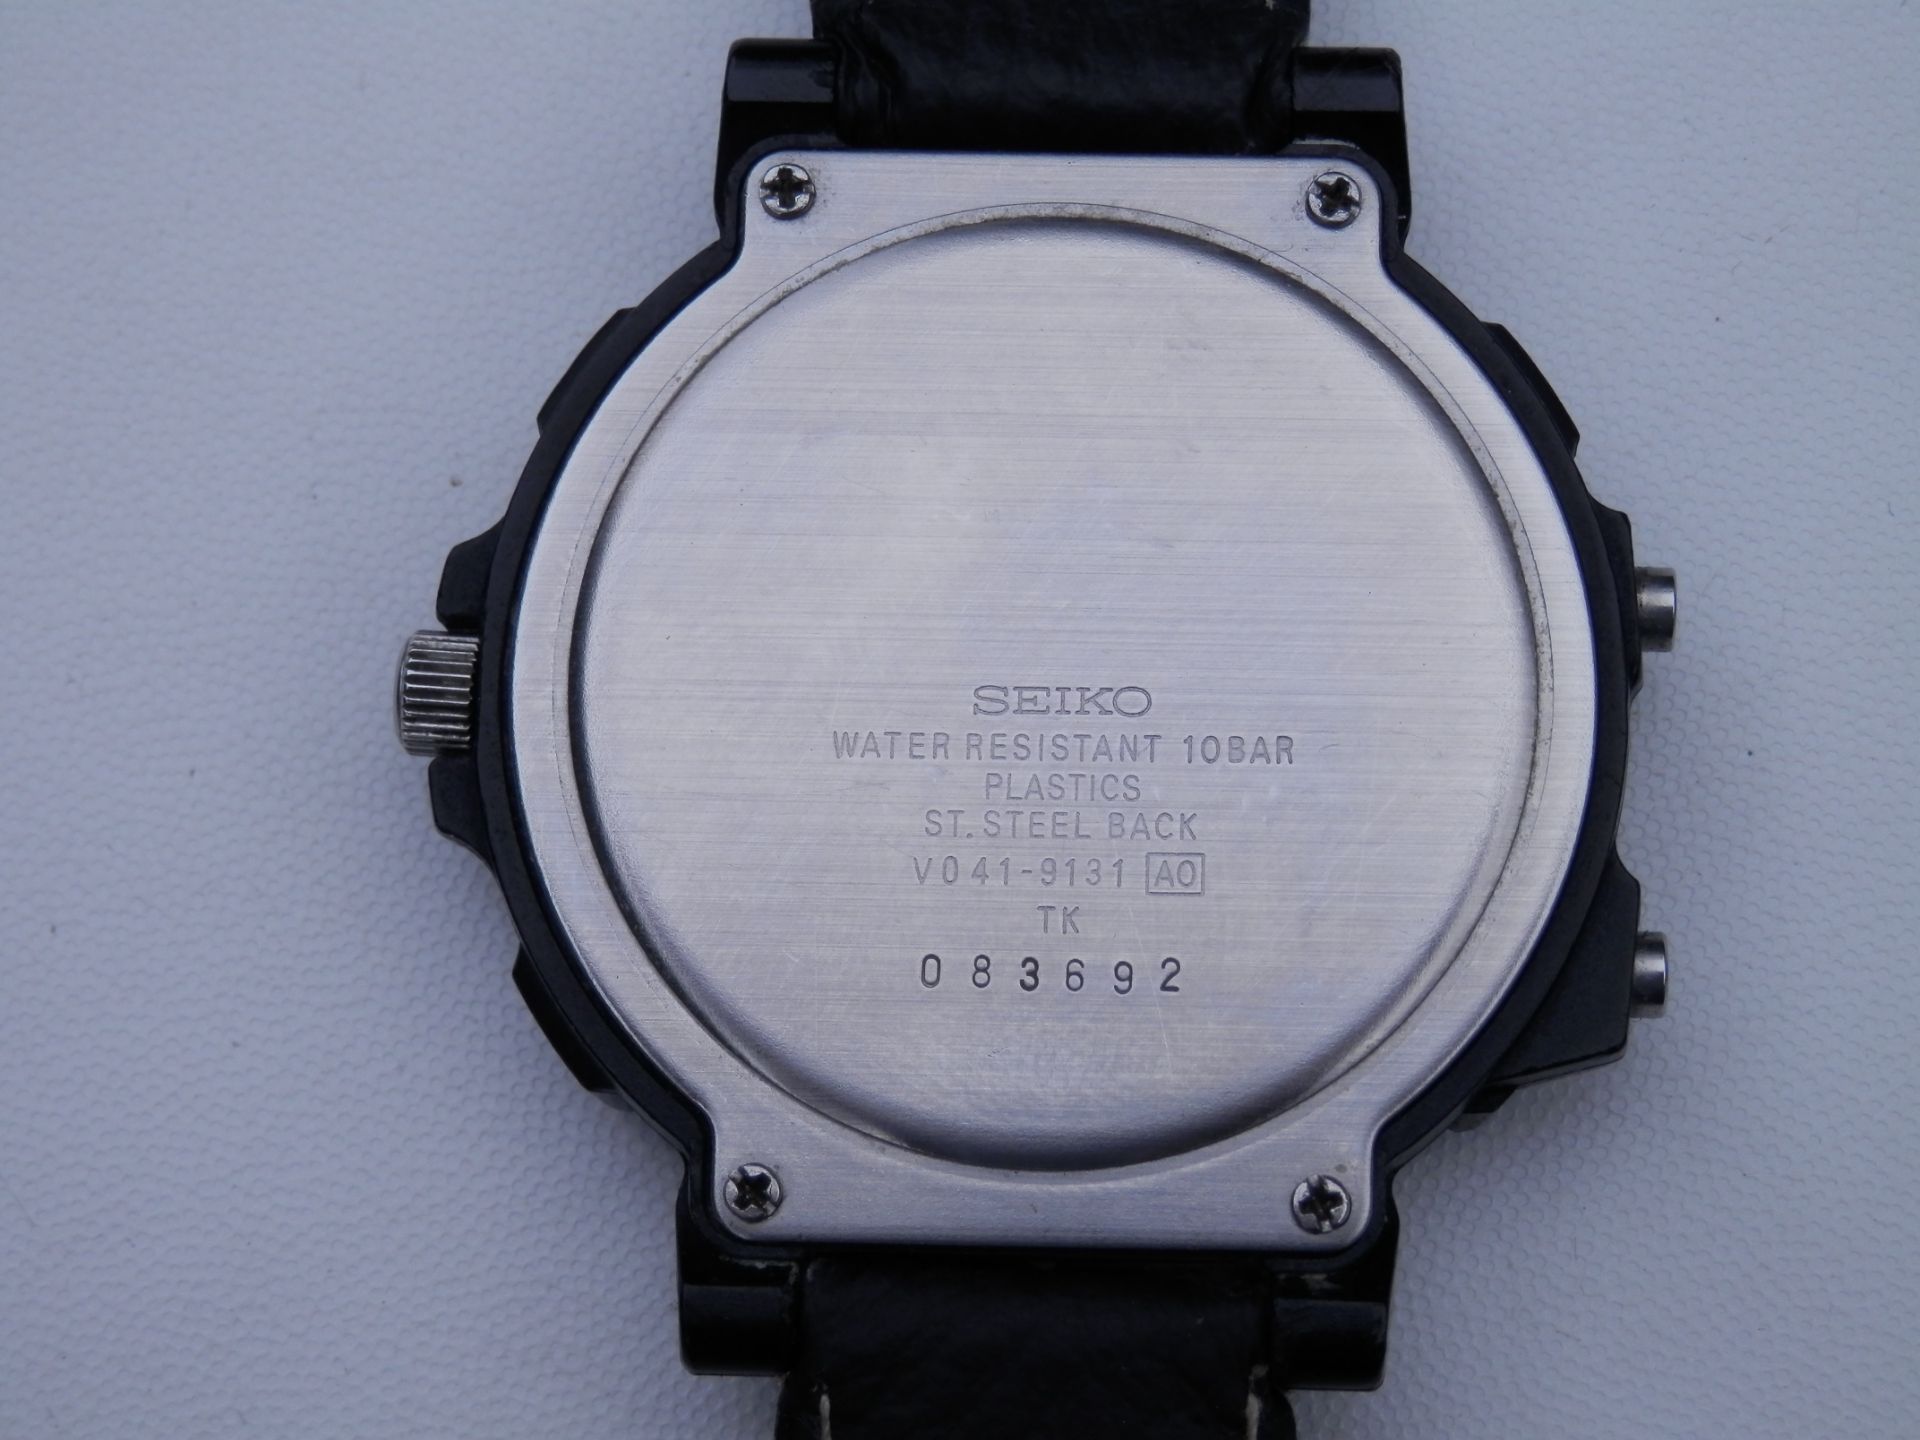 RARE WORKING GENTS 1990 SEIKO DX V041 ALARM CHRONOGRAPH, DIGITAL & ANALOGUE WATCH. VALUED AT £120+ - Image 7 of 8